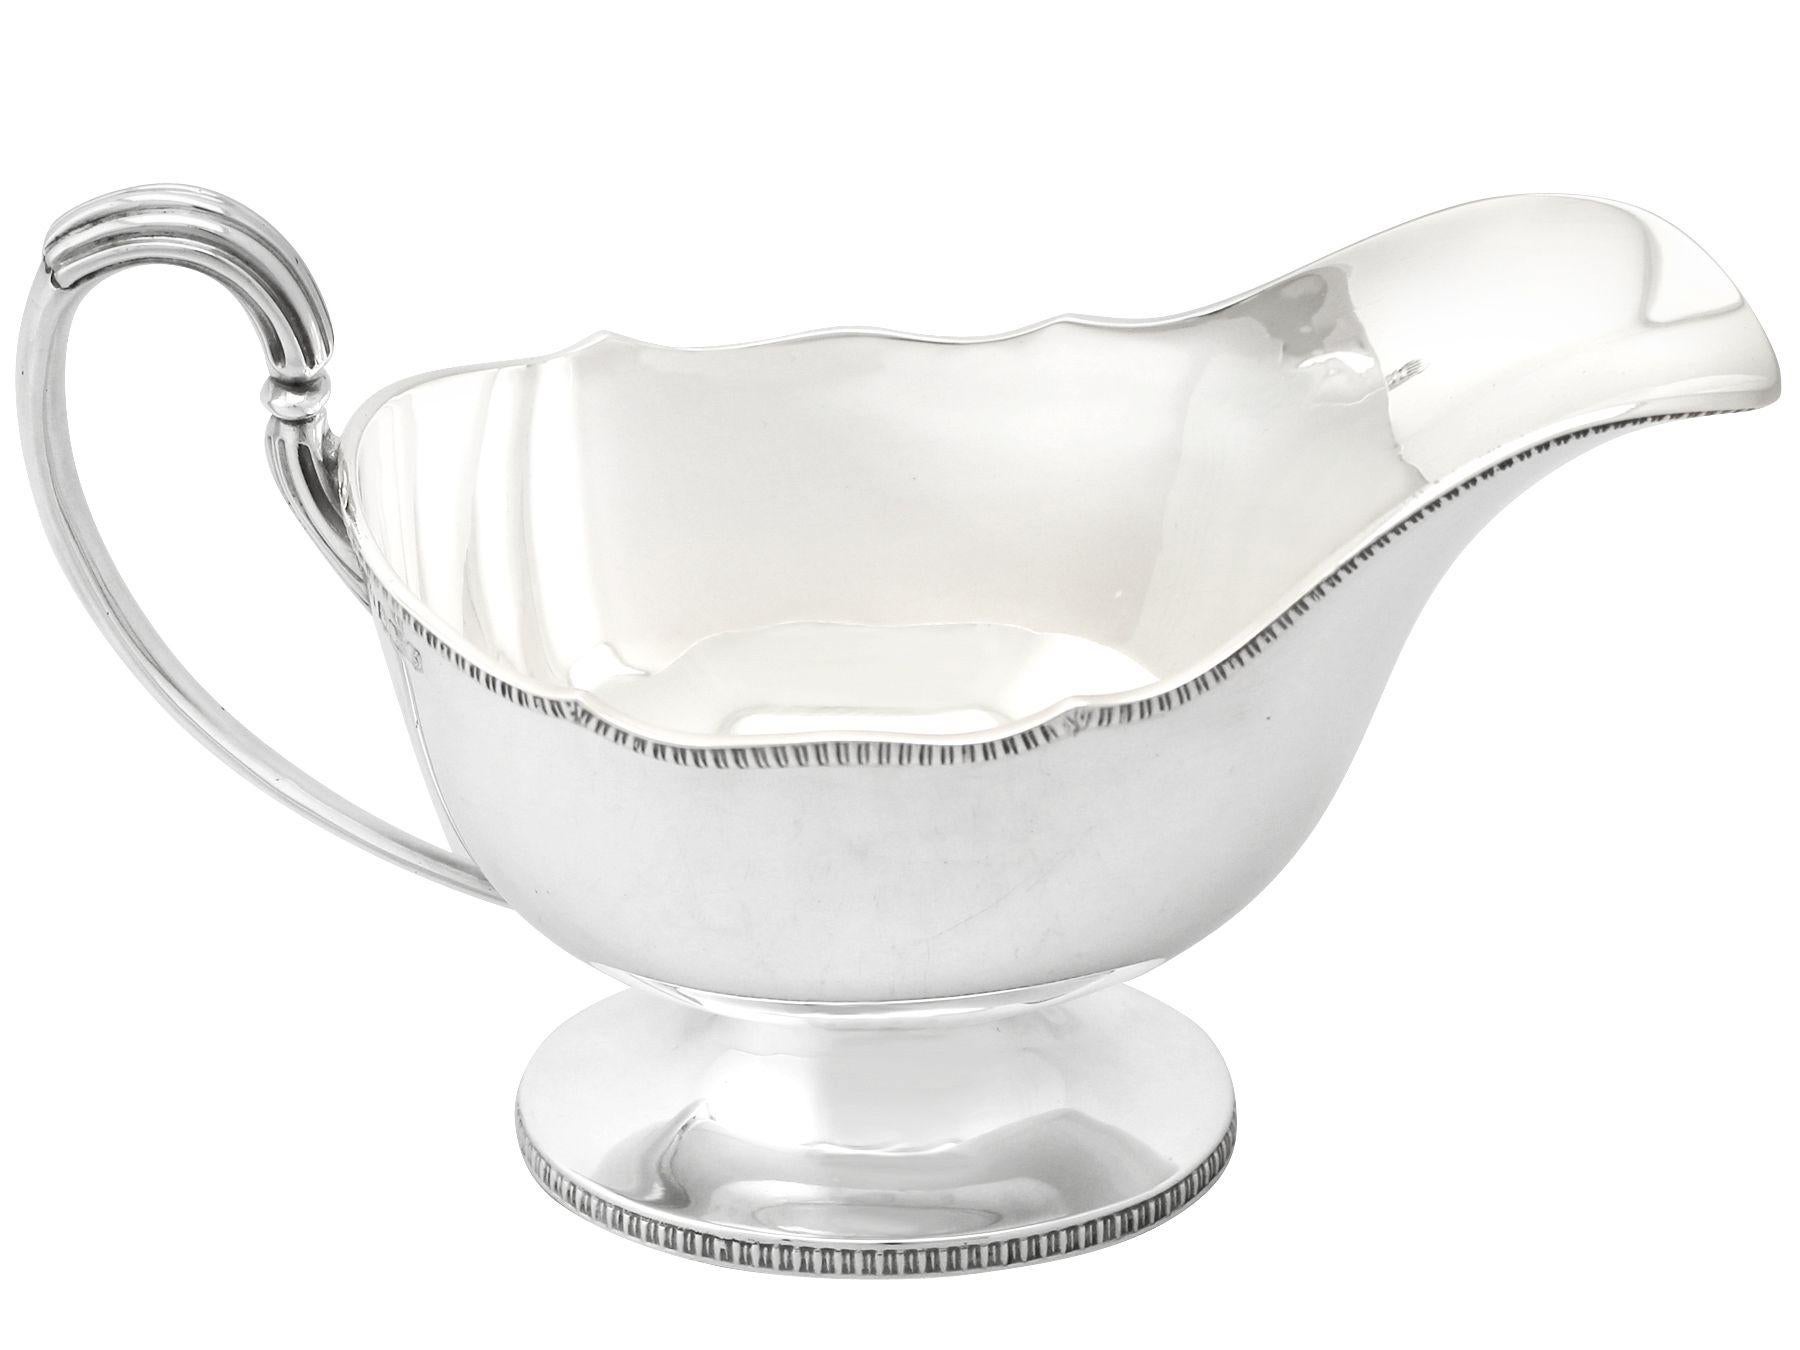 A fine and impressive antique George V English sterling silver sauceboat; an addition to our silver dining collection.

This fine antique George V sterling silver sauceboat/gravy boat has an oval plain boat shaped form onto an oval spreading